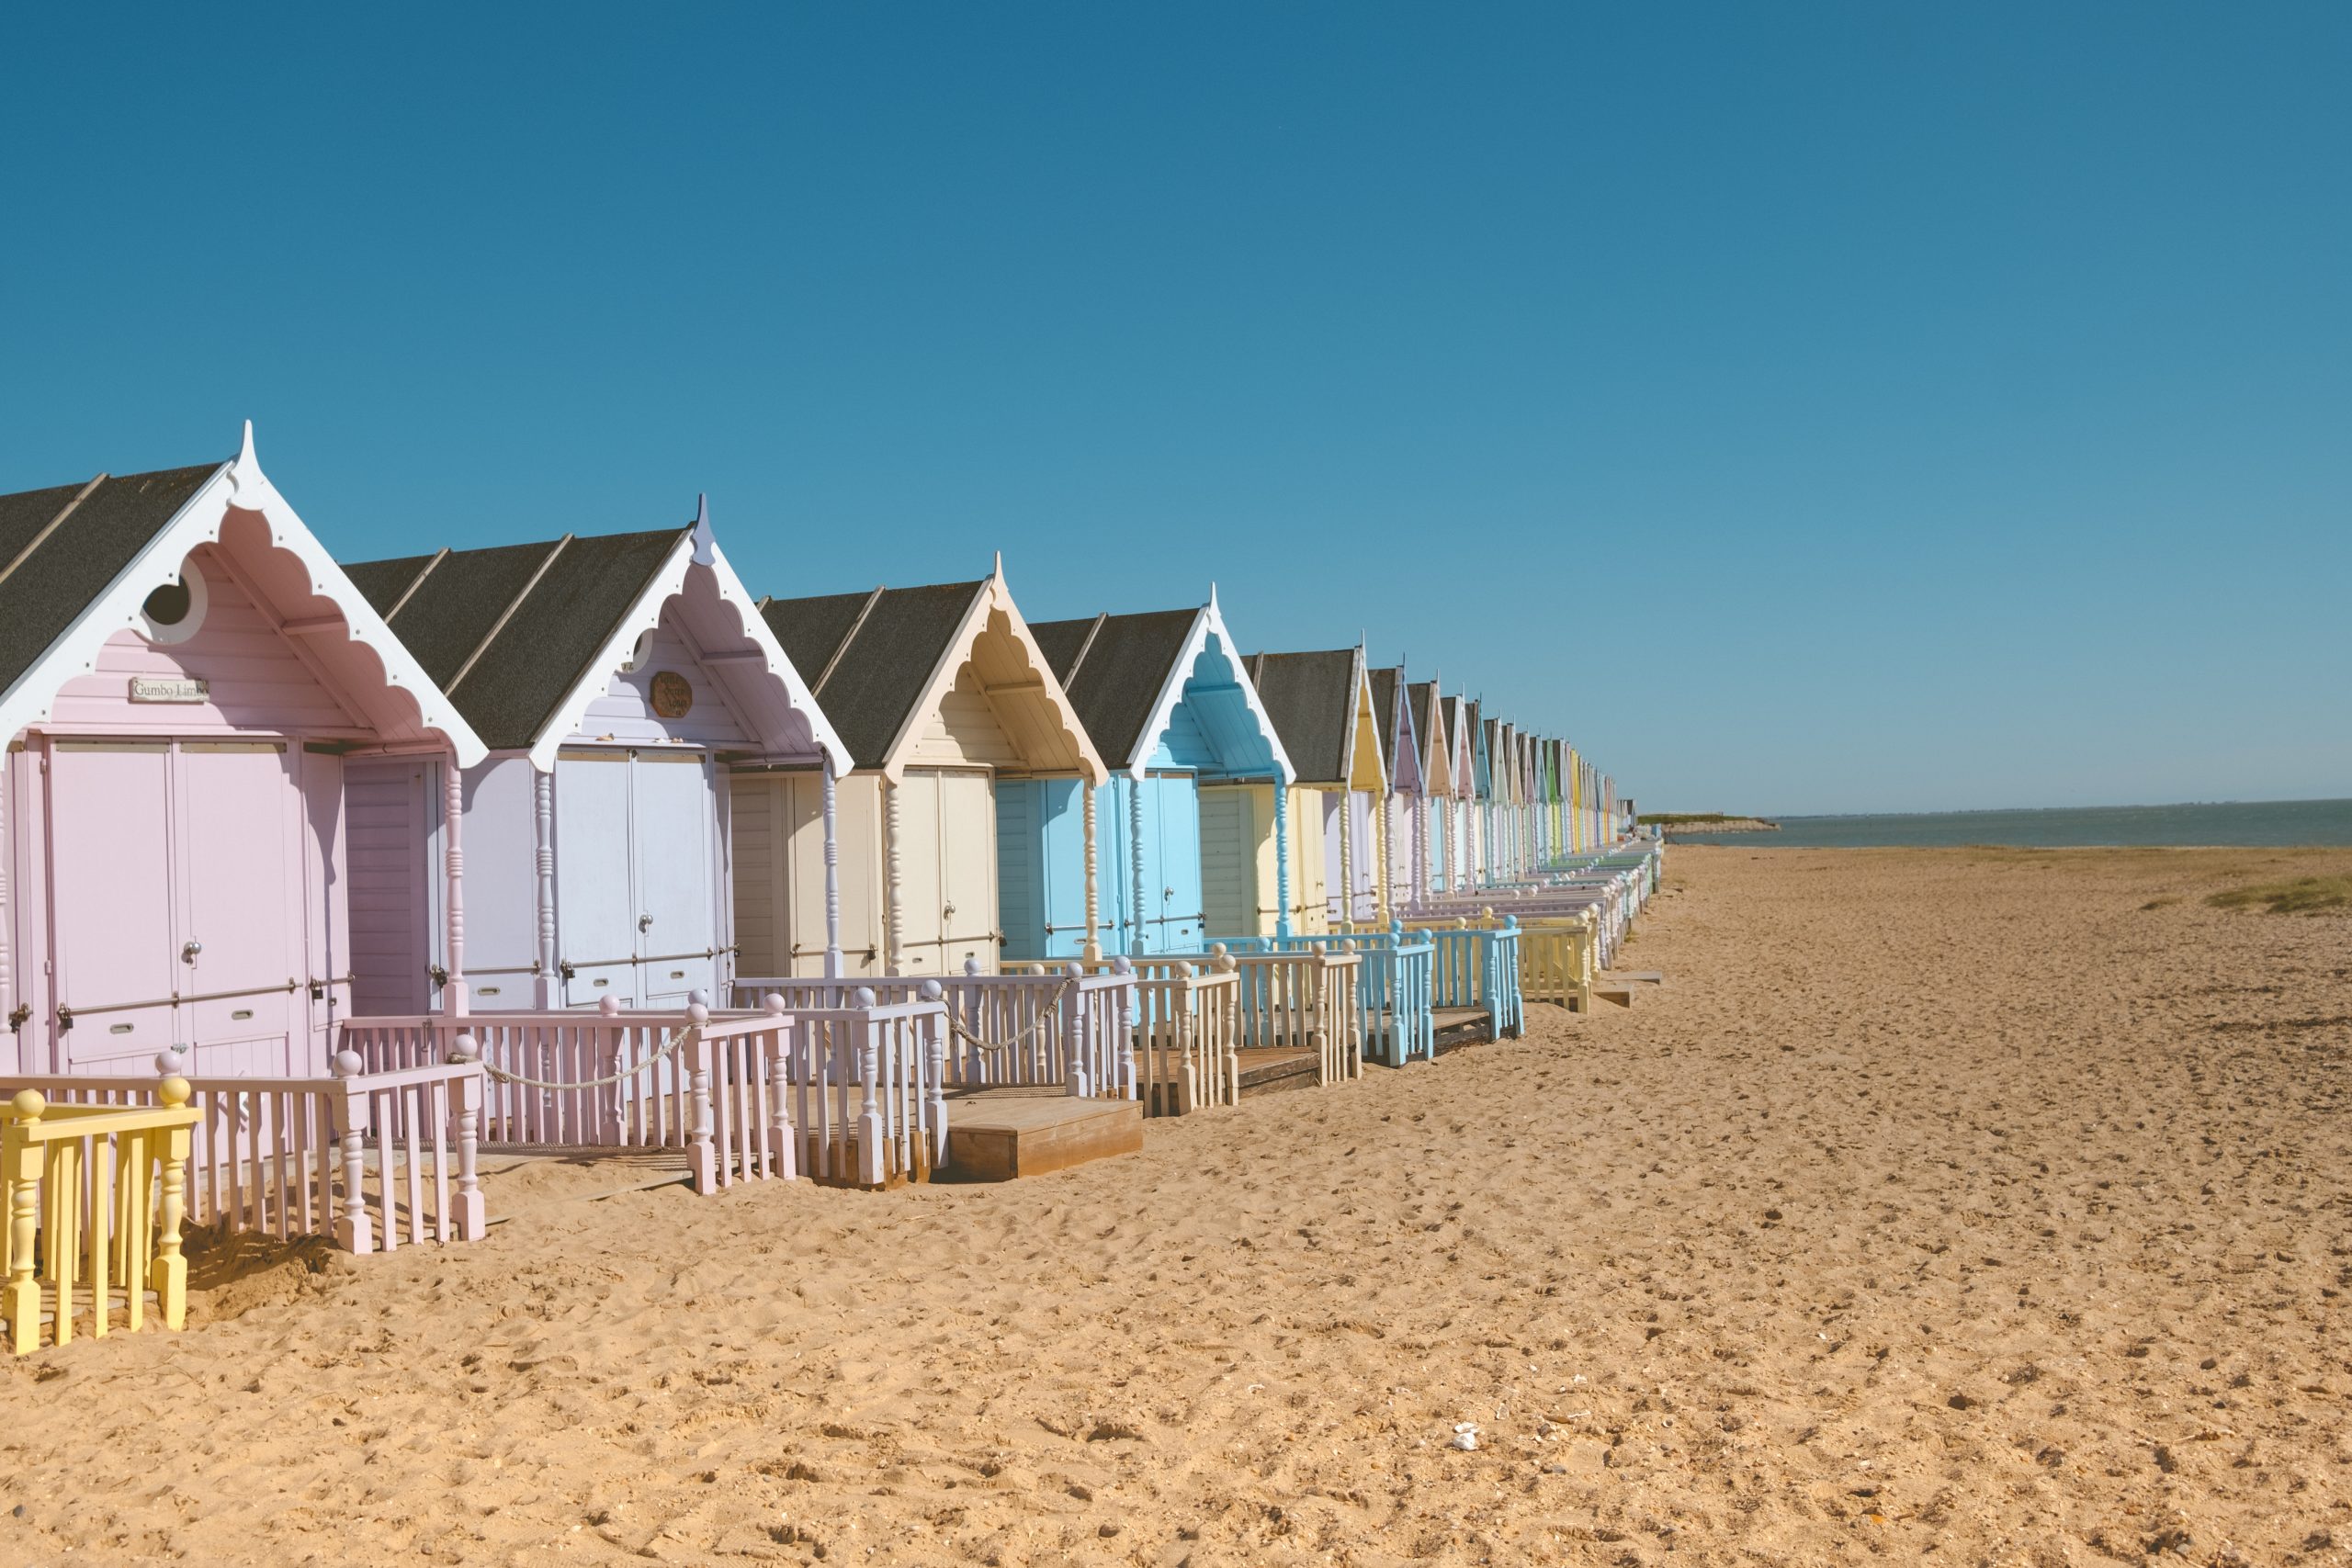 Mersea island with colourful huts on the beach